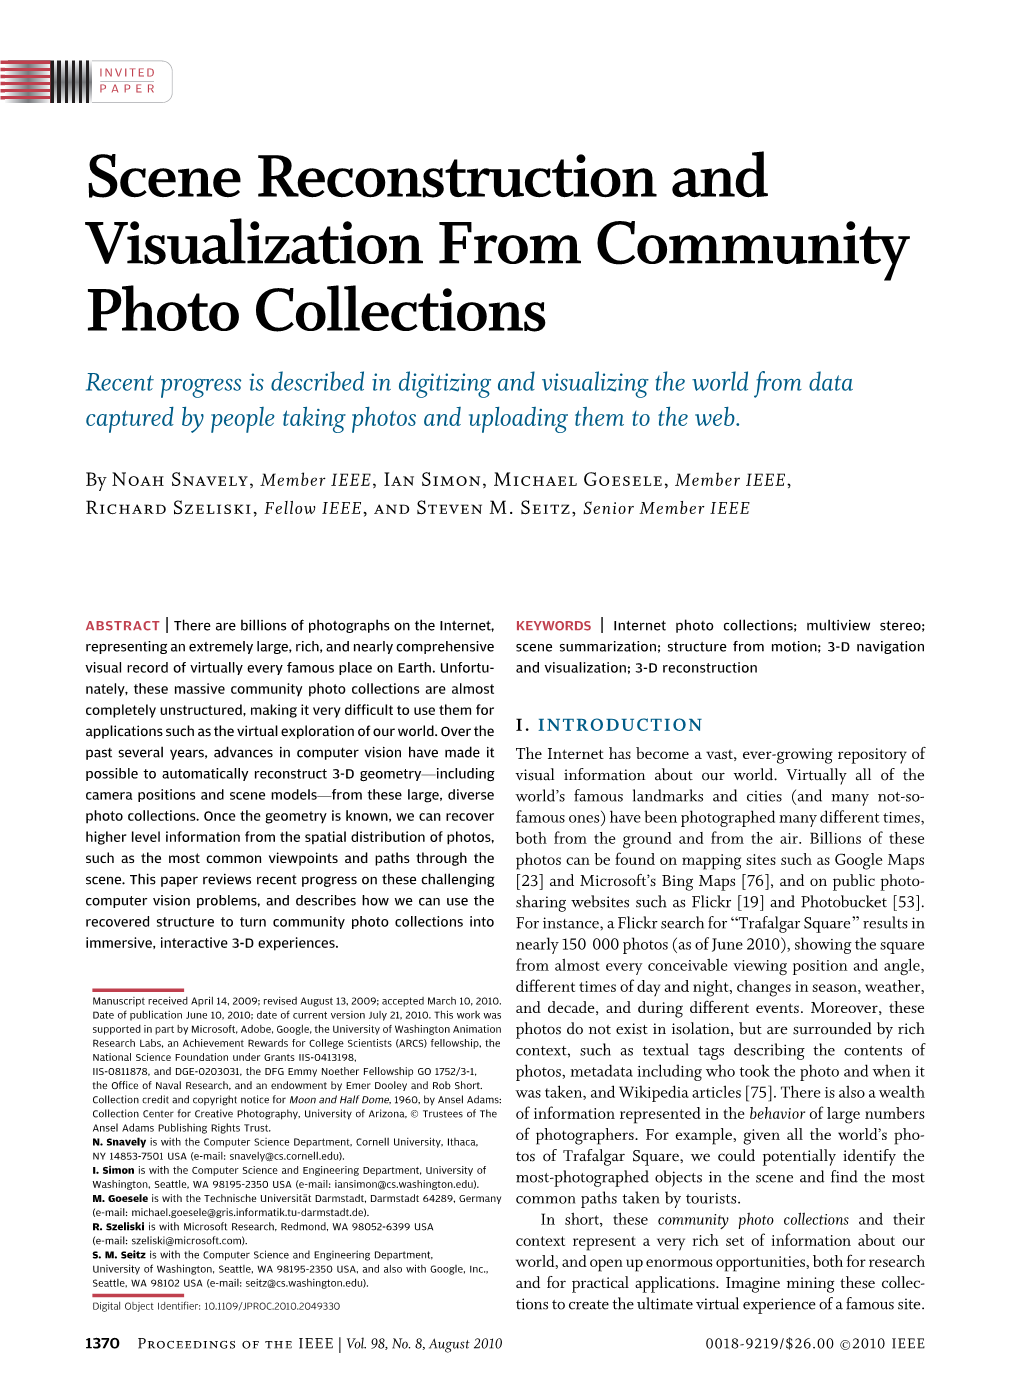 Scene Reconstruction and Visualization from Community Photo Collections